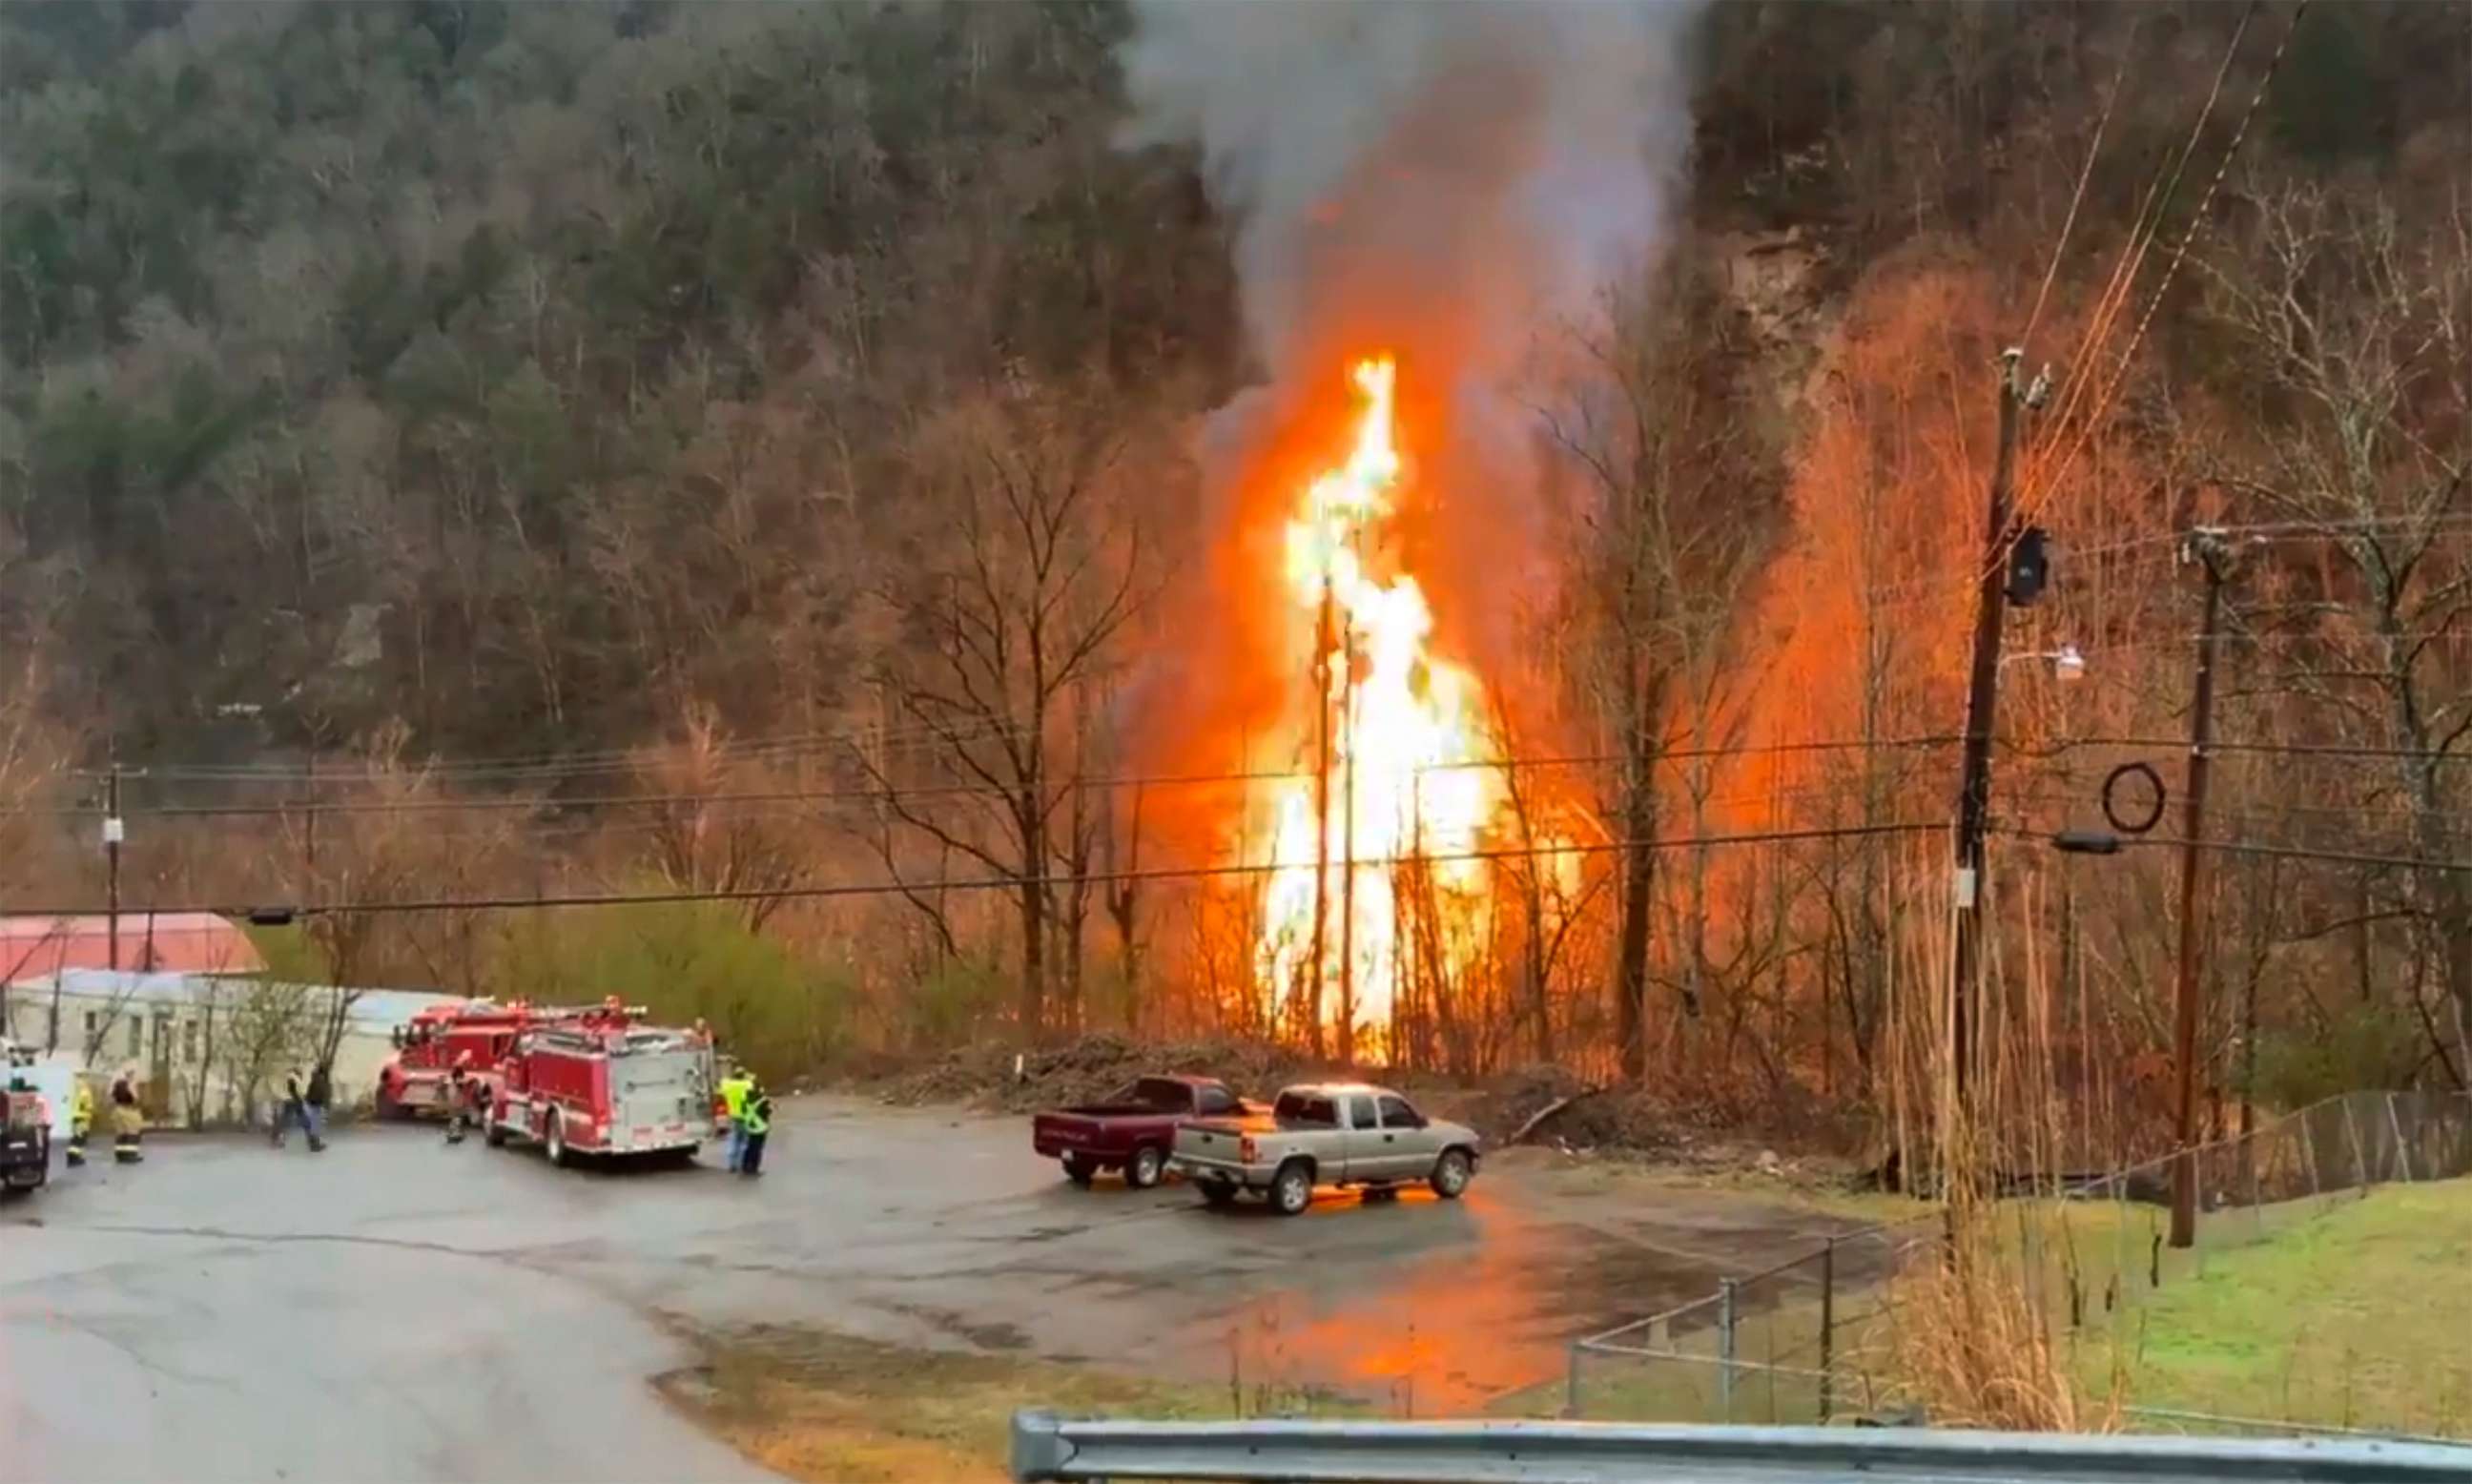 First responders are on the scene of a train derailment in eastern Kentucky, Feb. 13, 2020. Two crew members of the CSX train were trapped and a flammable liquid was leaking into a nearby river, said Charles Maynard with Pike County Emergency Management.